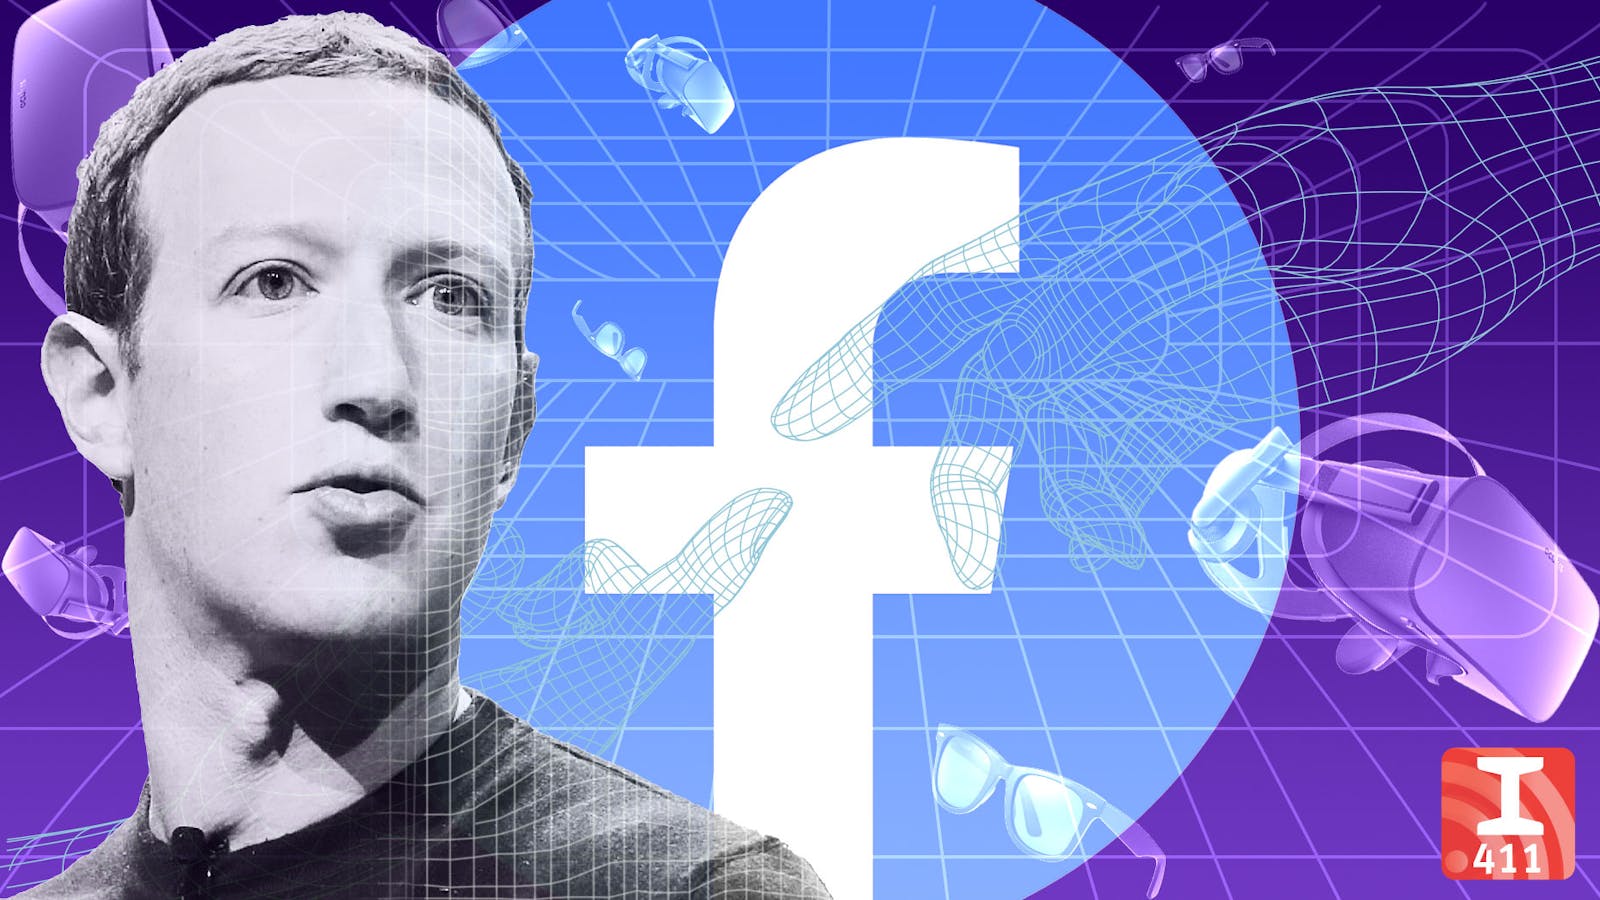 Facebook CEO Mark Zuckerberg. Photo by Bloomberg; illustration by Mike Sullivan